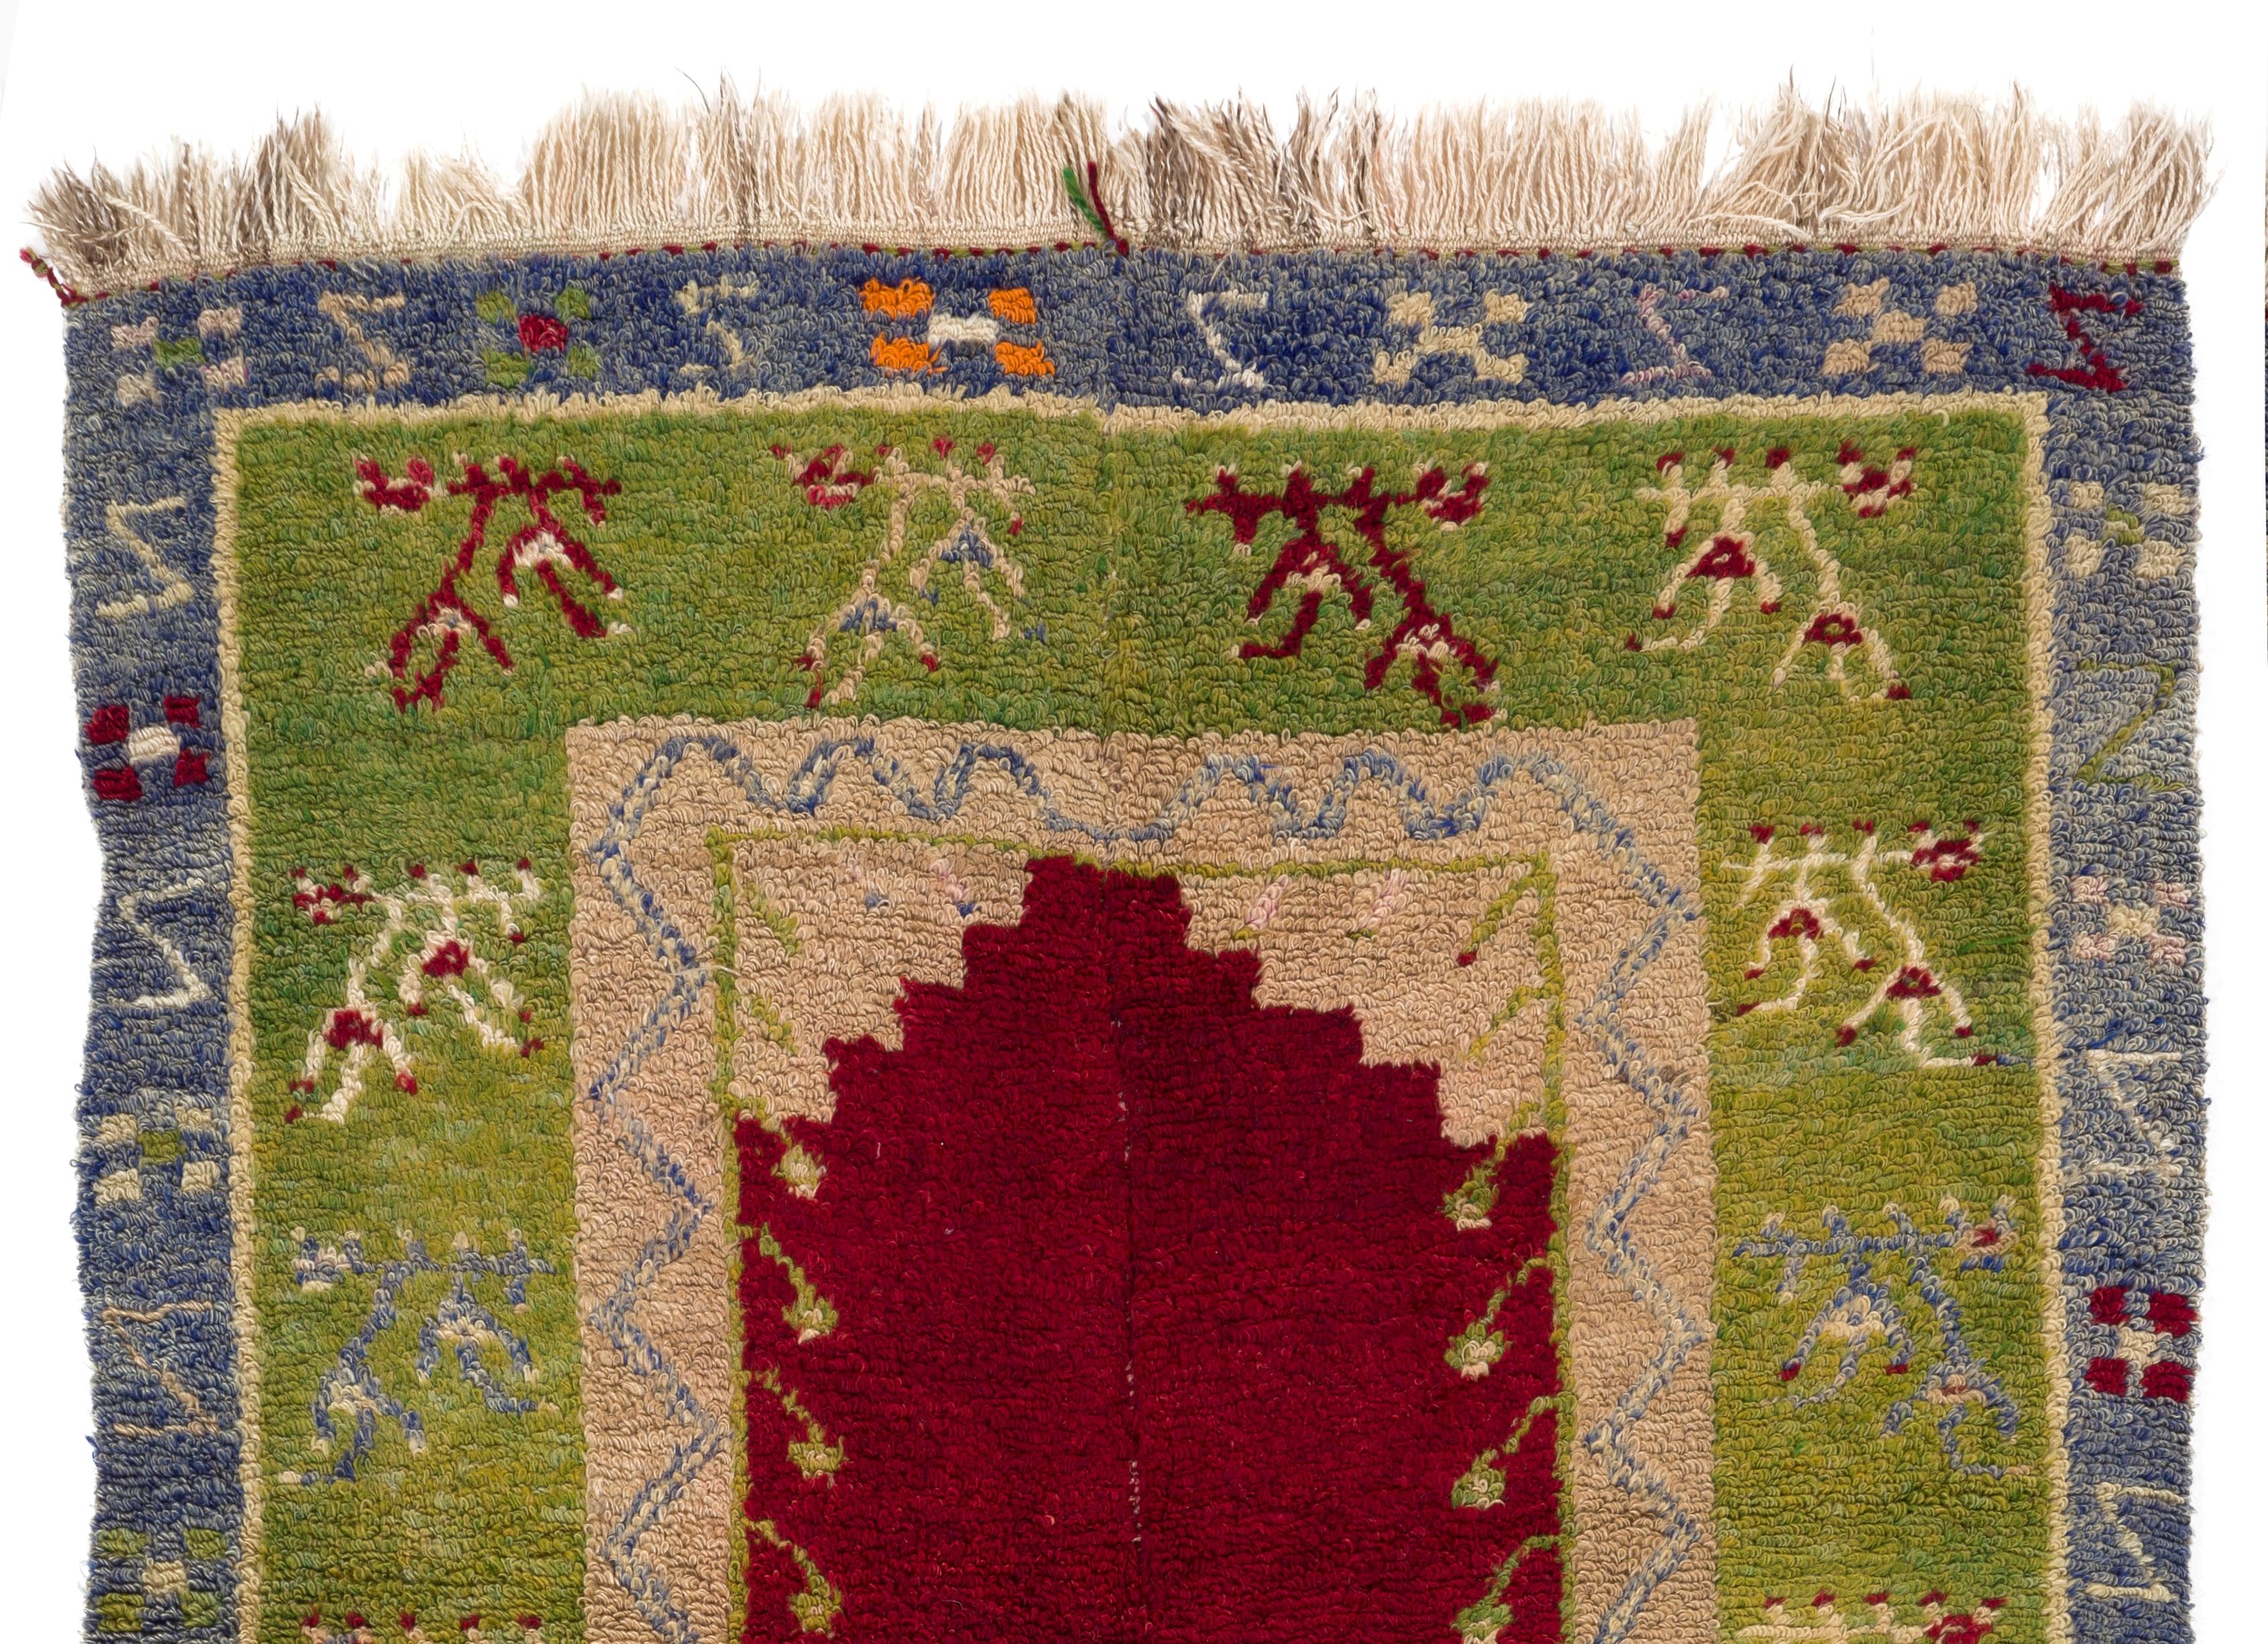 This one-of-a-kind vintage tulu rug is made of hand-spun and hand-dyed lamb’s wool, therefore it is very soft and luscious and feels comfortable under your feet. The rug has a niche design surrounded with bunches of stylized flowers in a warm and